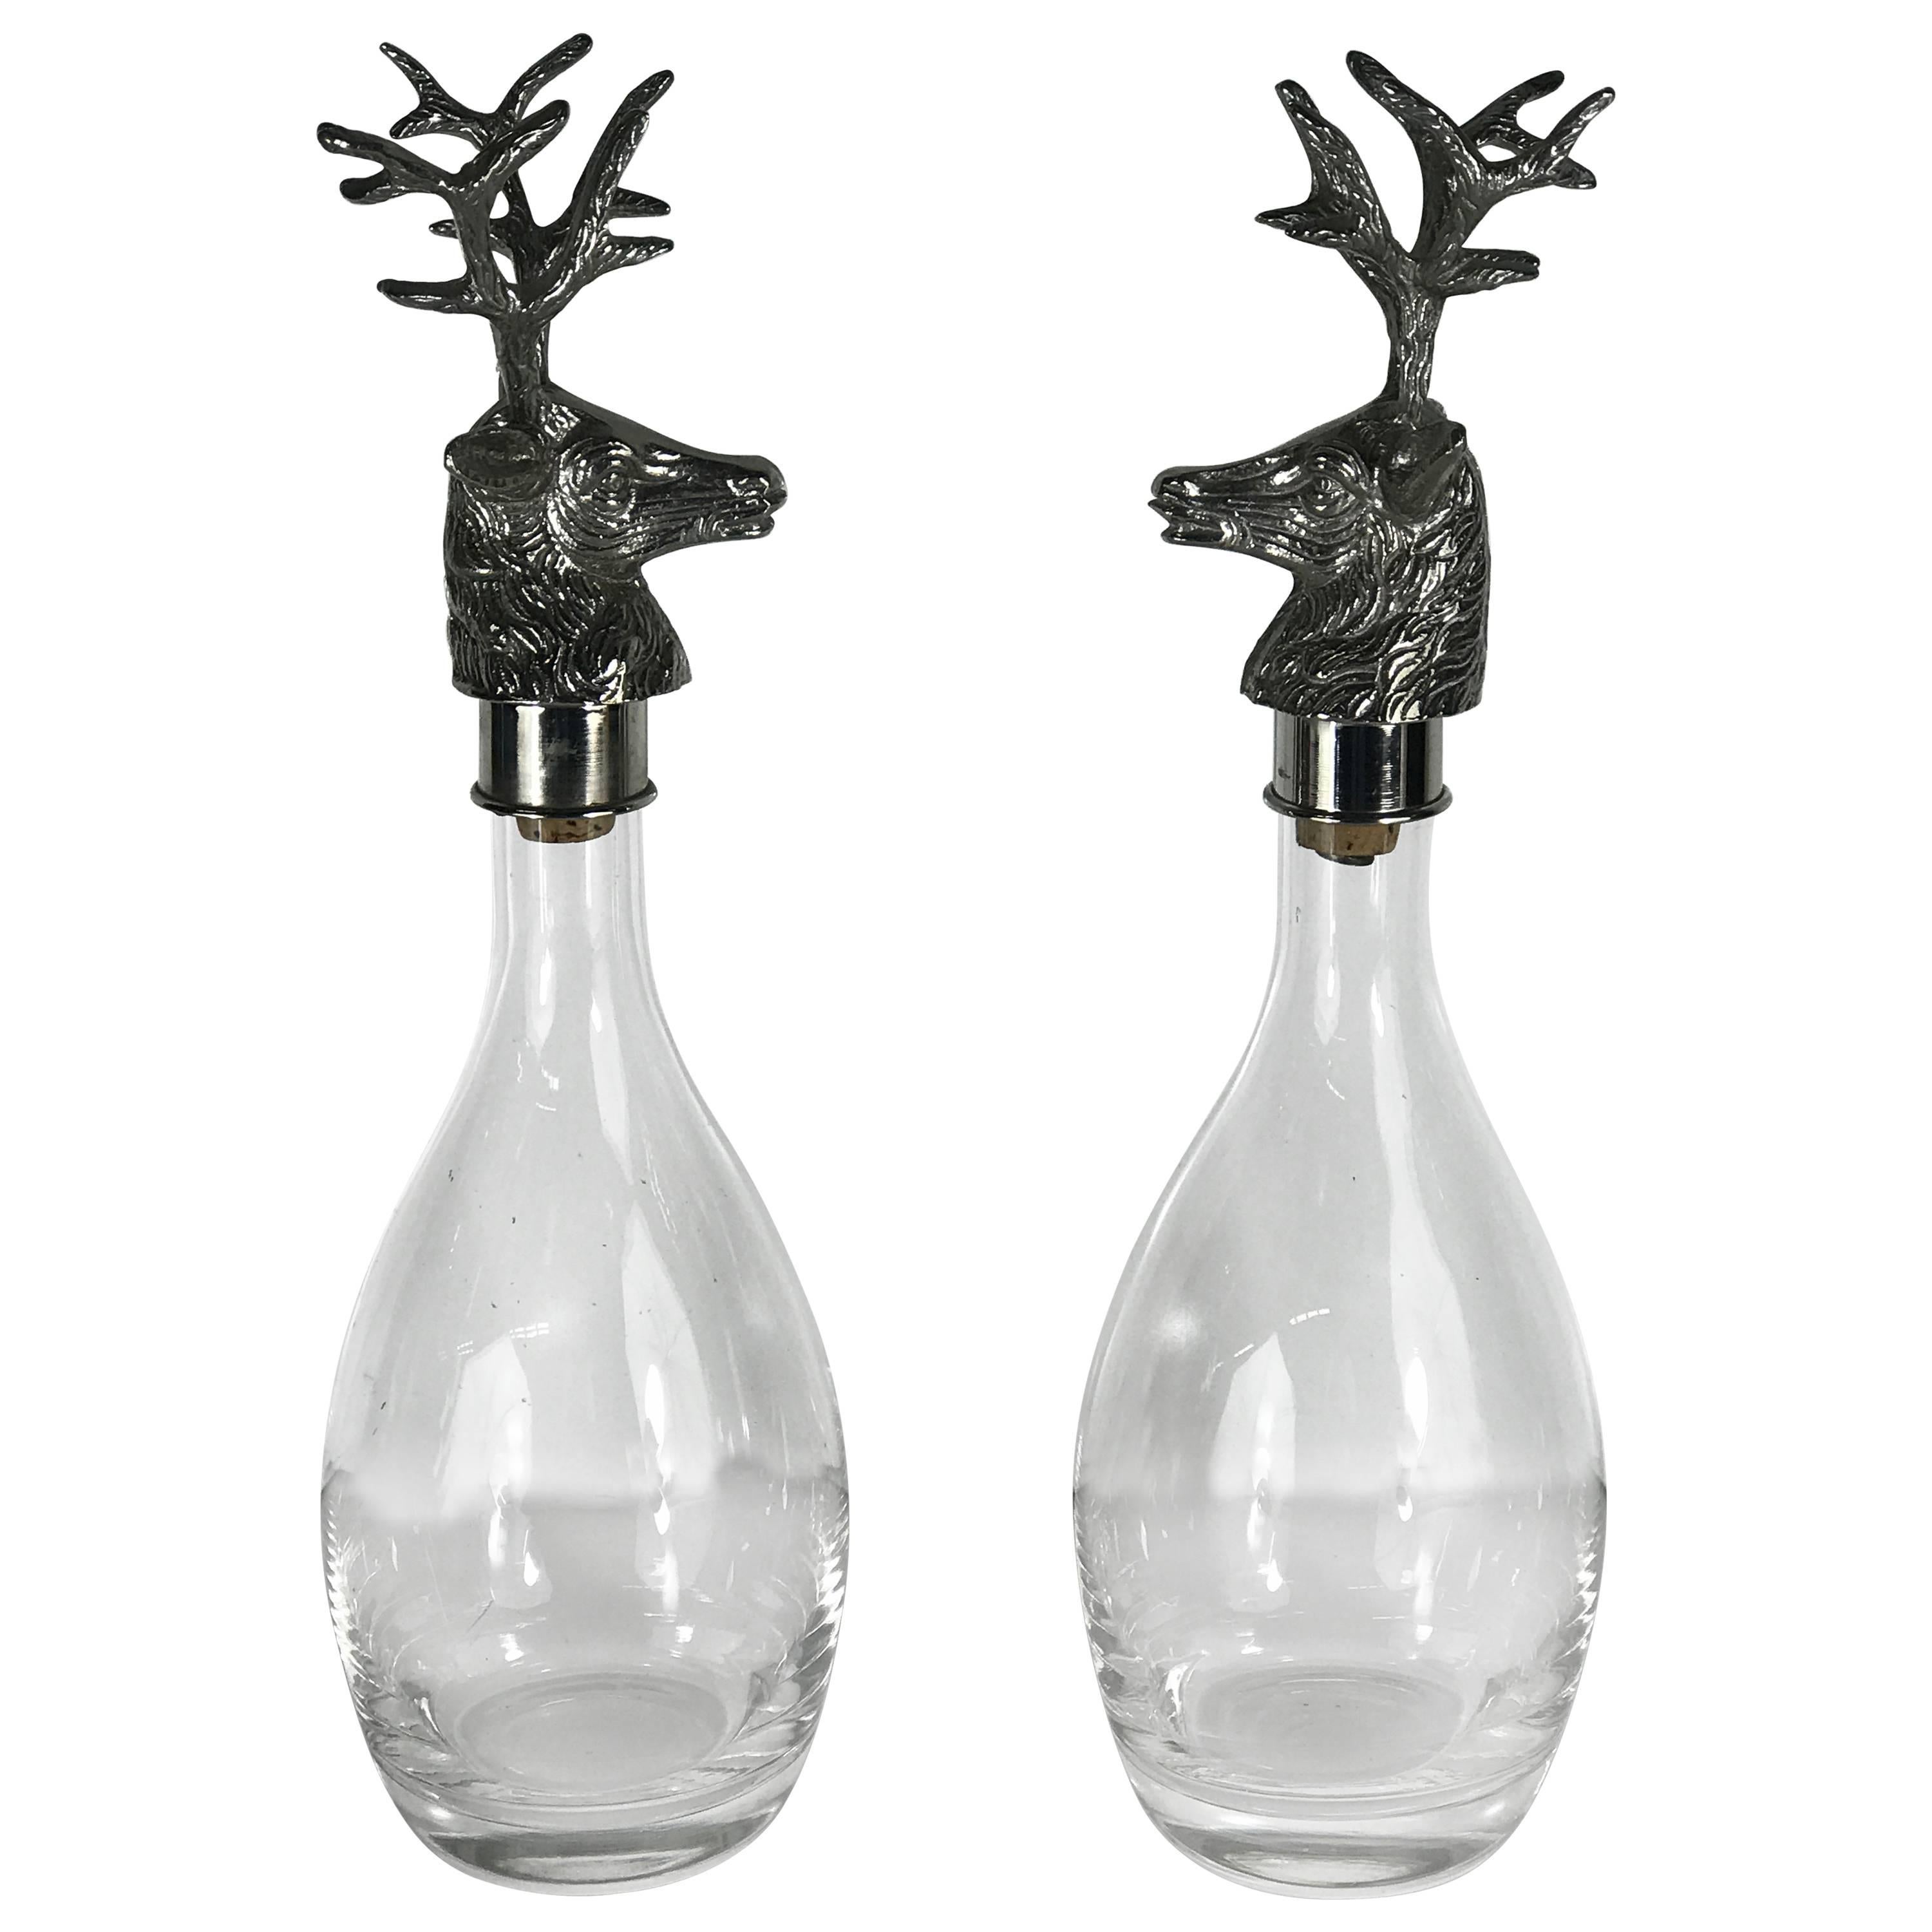 Pair of ARTHUR COURT Stag Motif Decanters